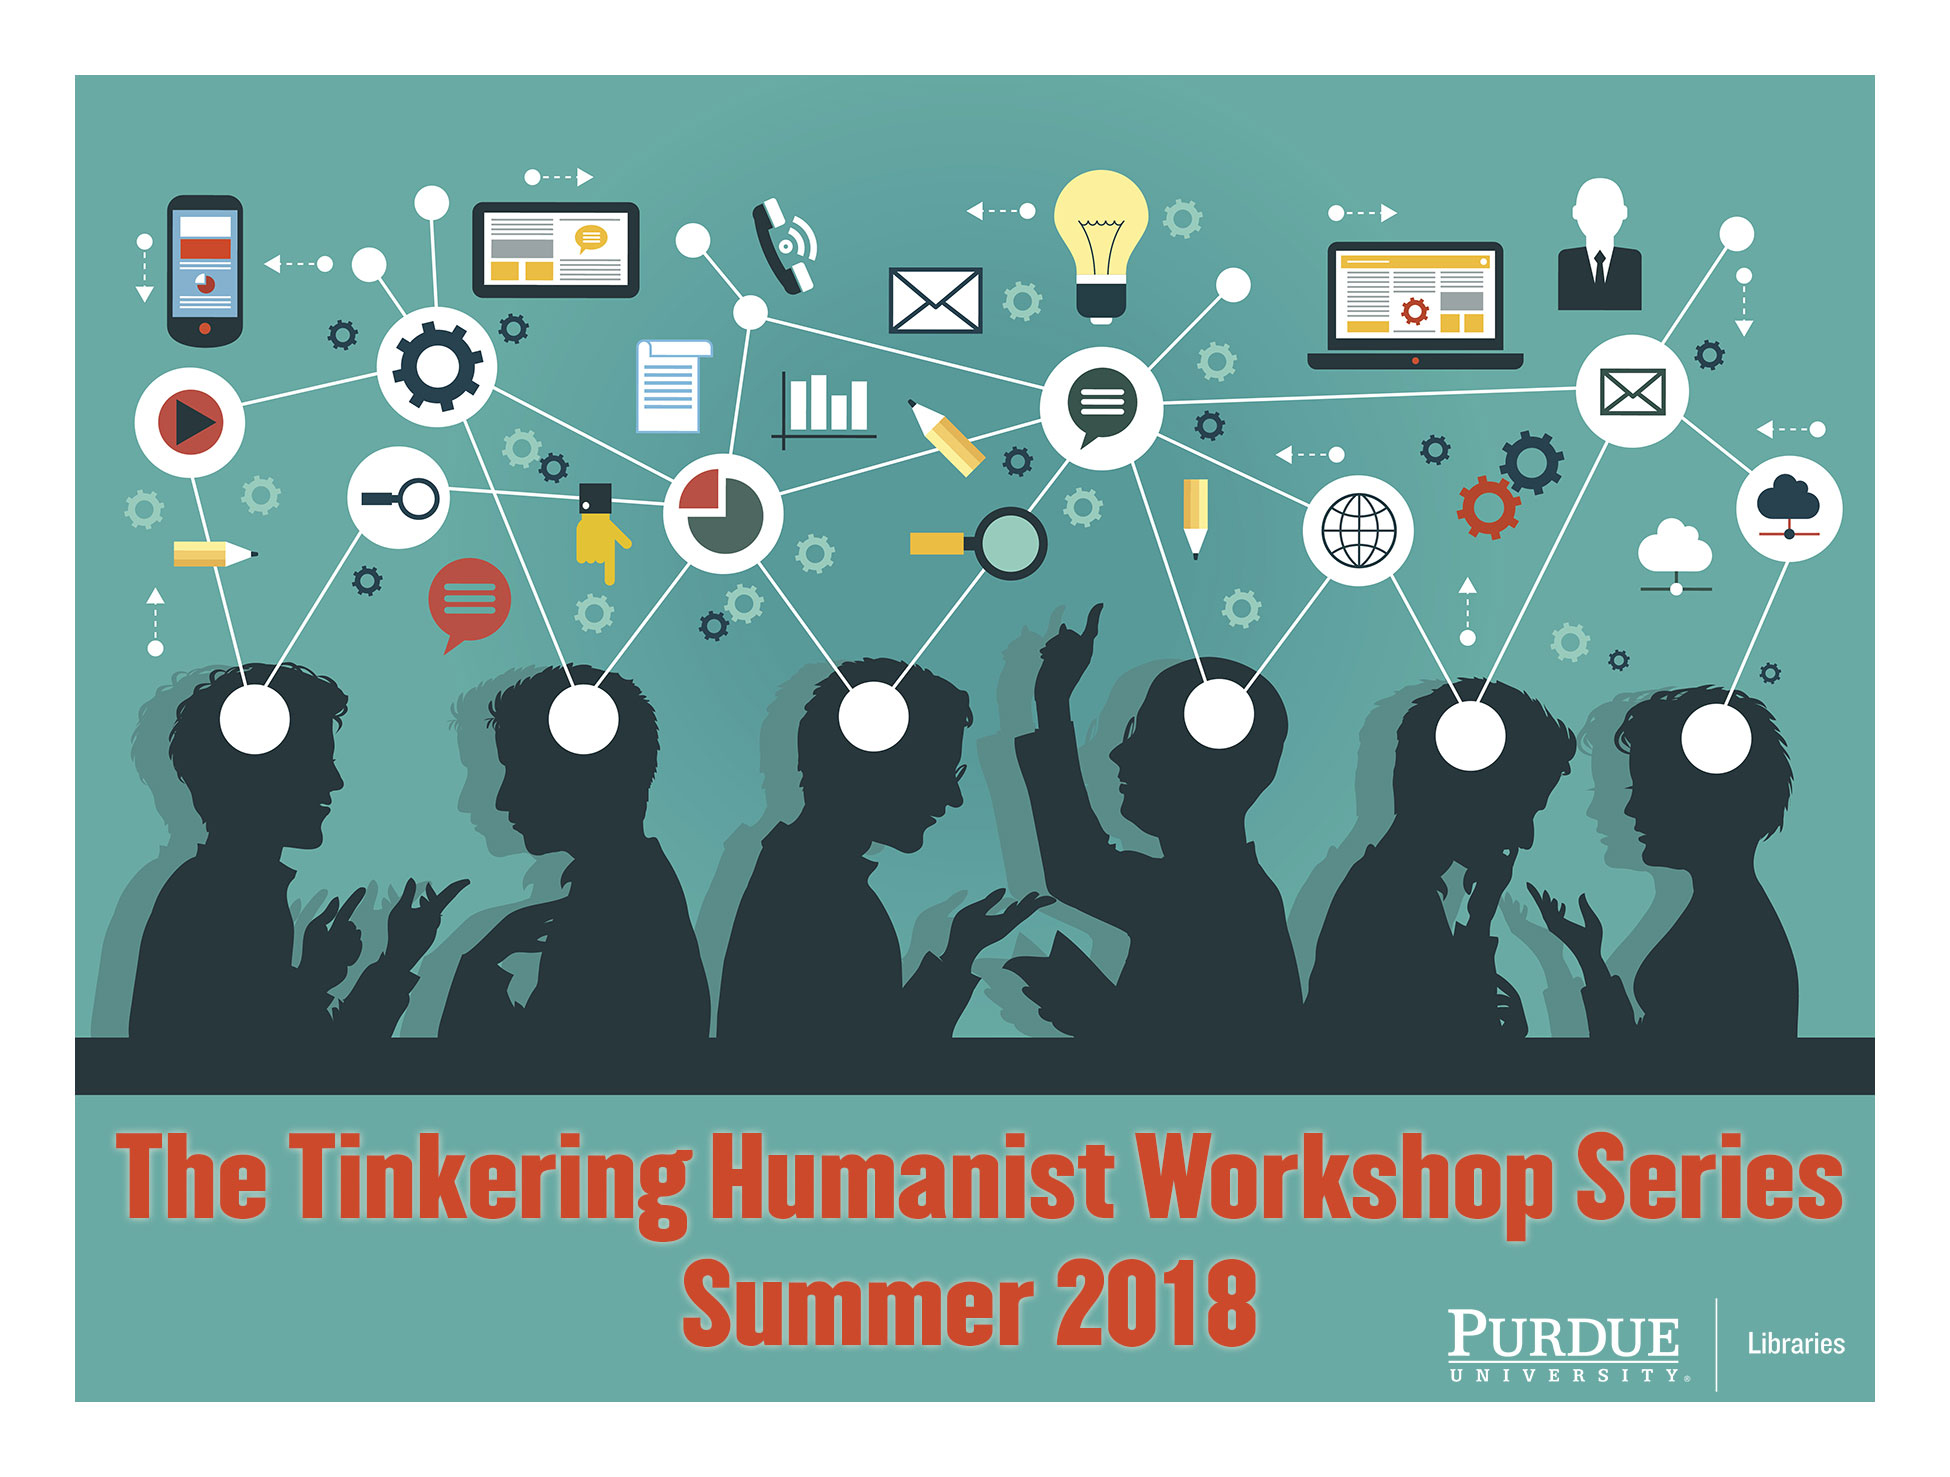 The Tinkering Humanist: A Digital Humanities Workshop Series Sponsored by Purdue Libraries